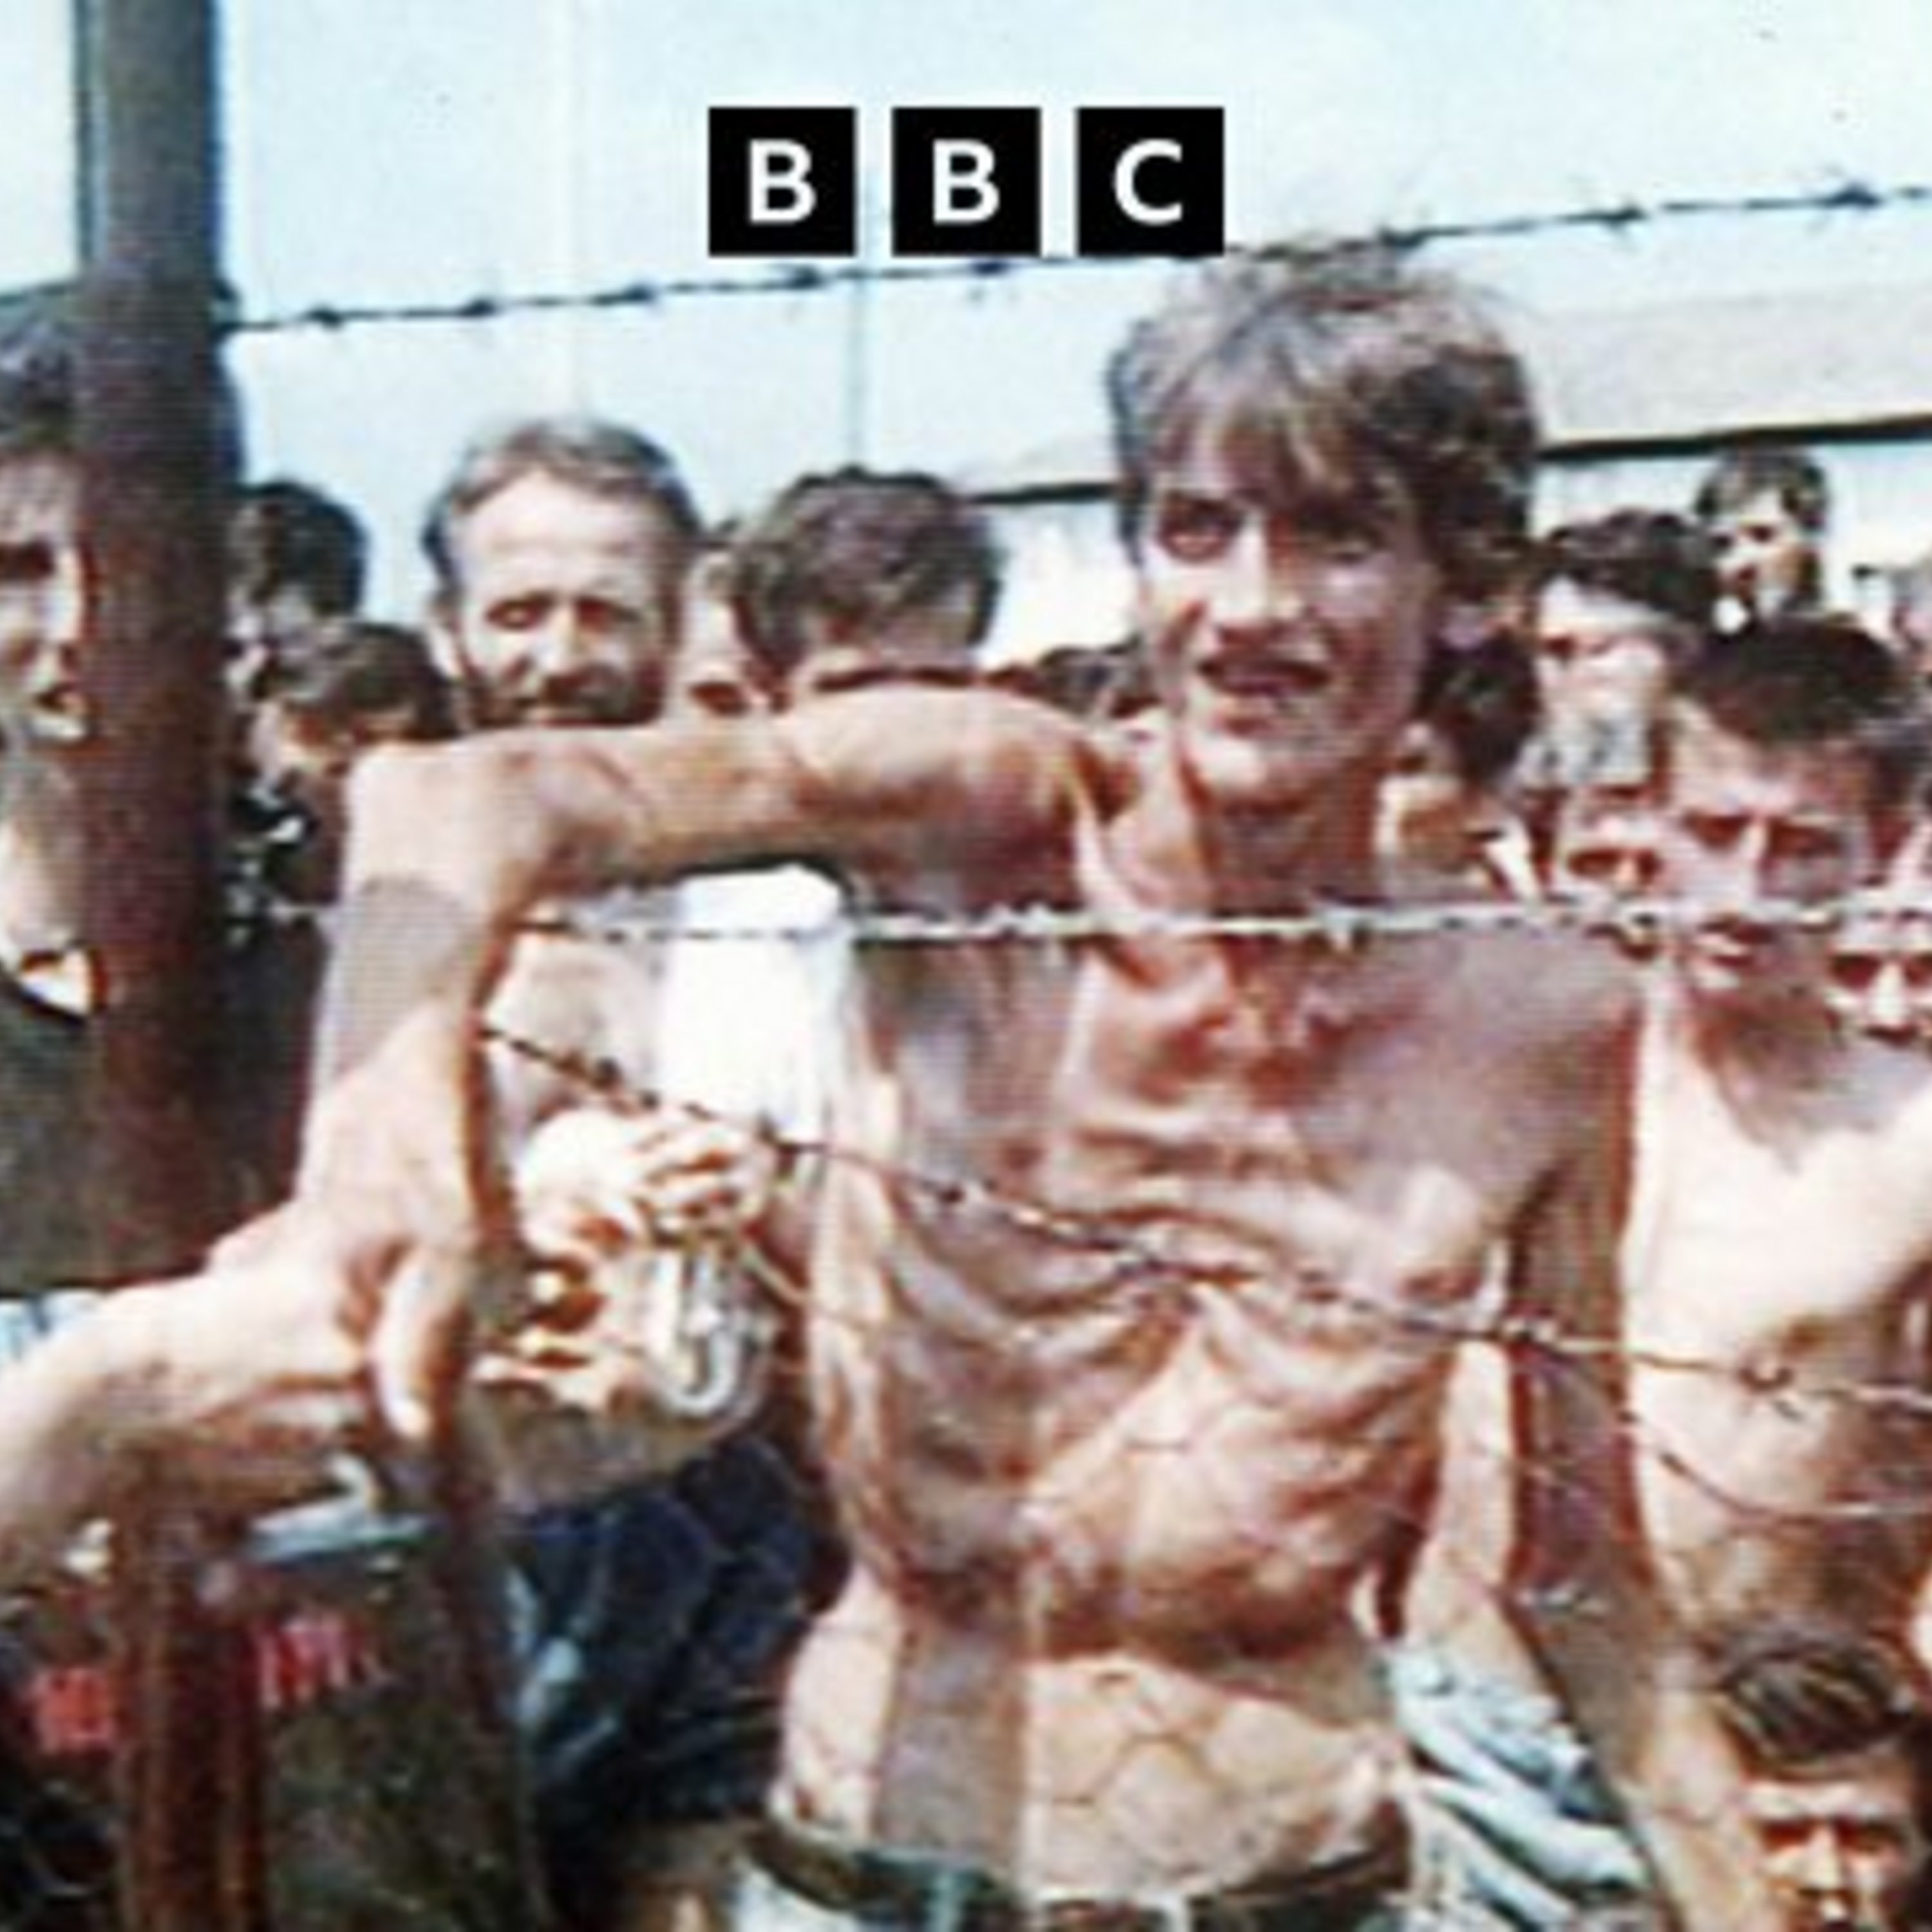 Bosnian concentration camp photo and hero clown